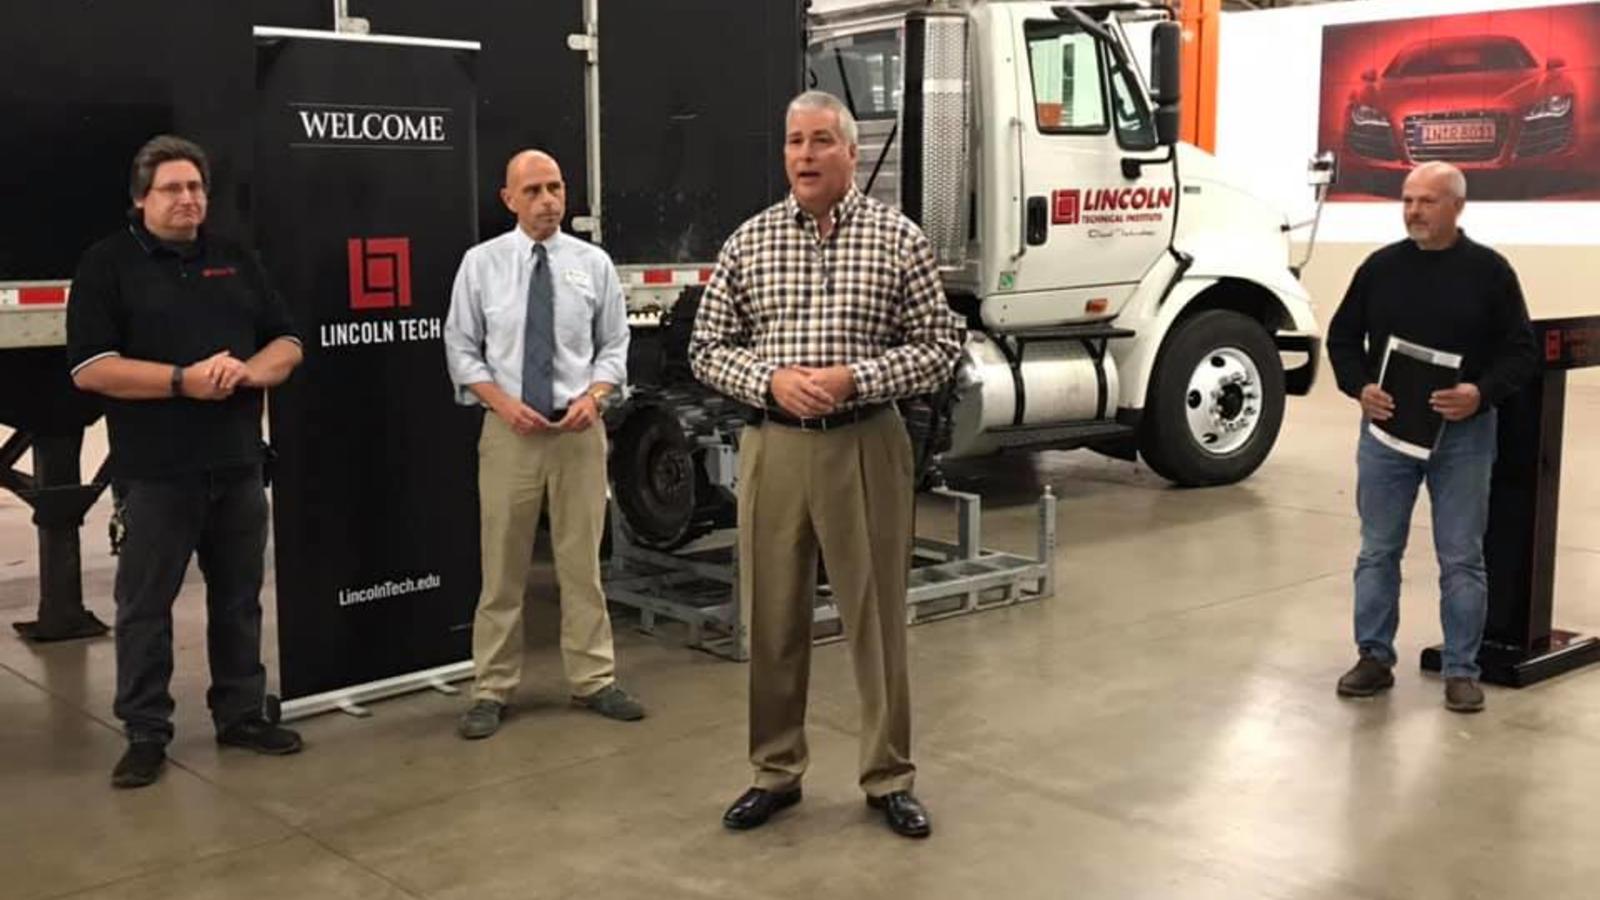 Tri-State Kenworth reps discuss students pursuing Kenworth careers after graduation.